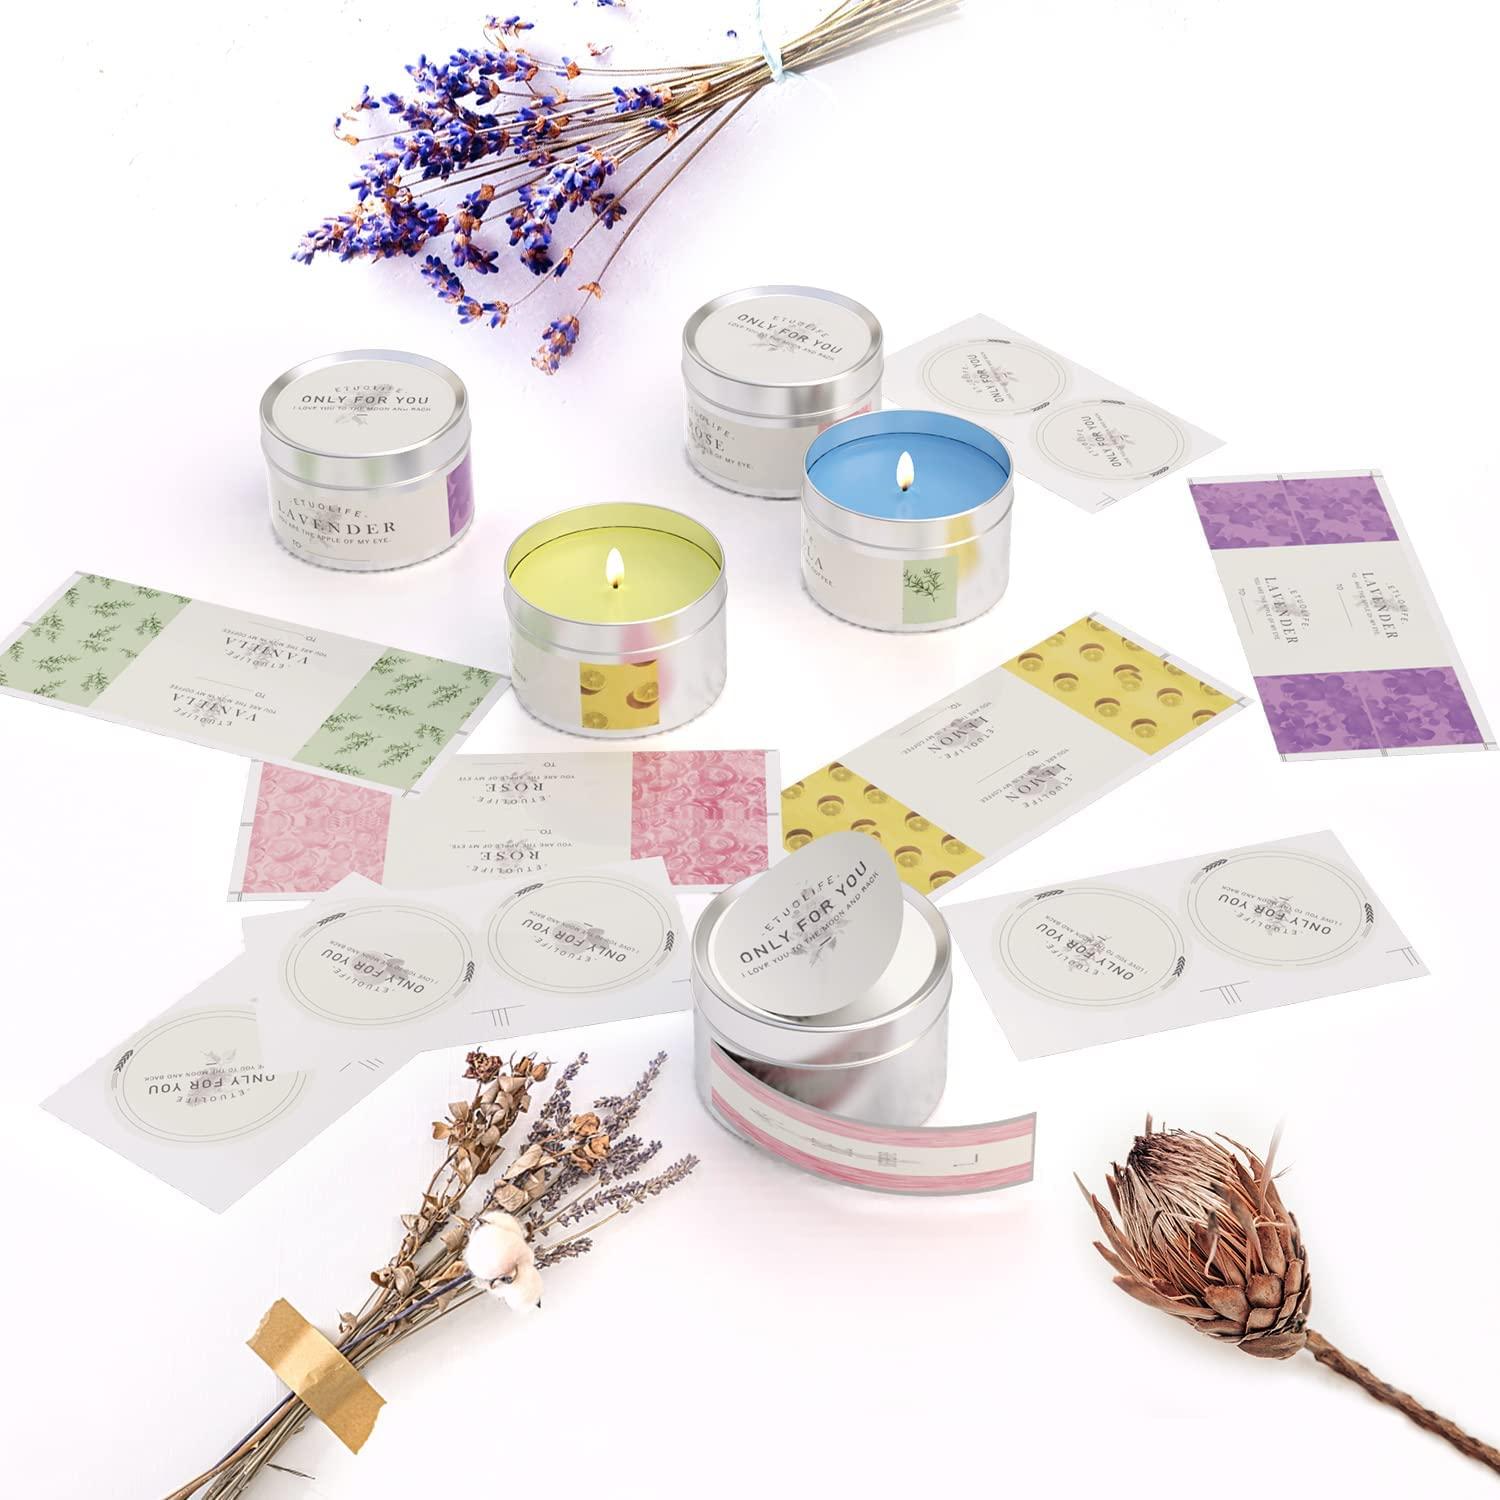 Candle Making Kit, DIY Candle Making Supplies Include Soy Wax,Wicks,  Melting Pot,Candle tins, Scents,Dyes, Sticker for DIY Scented Candles 